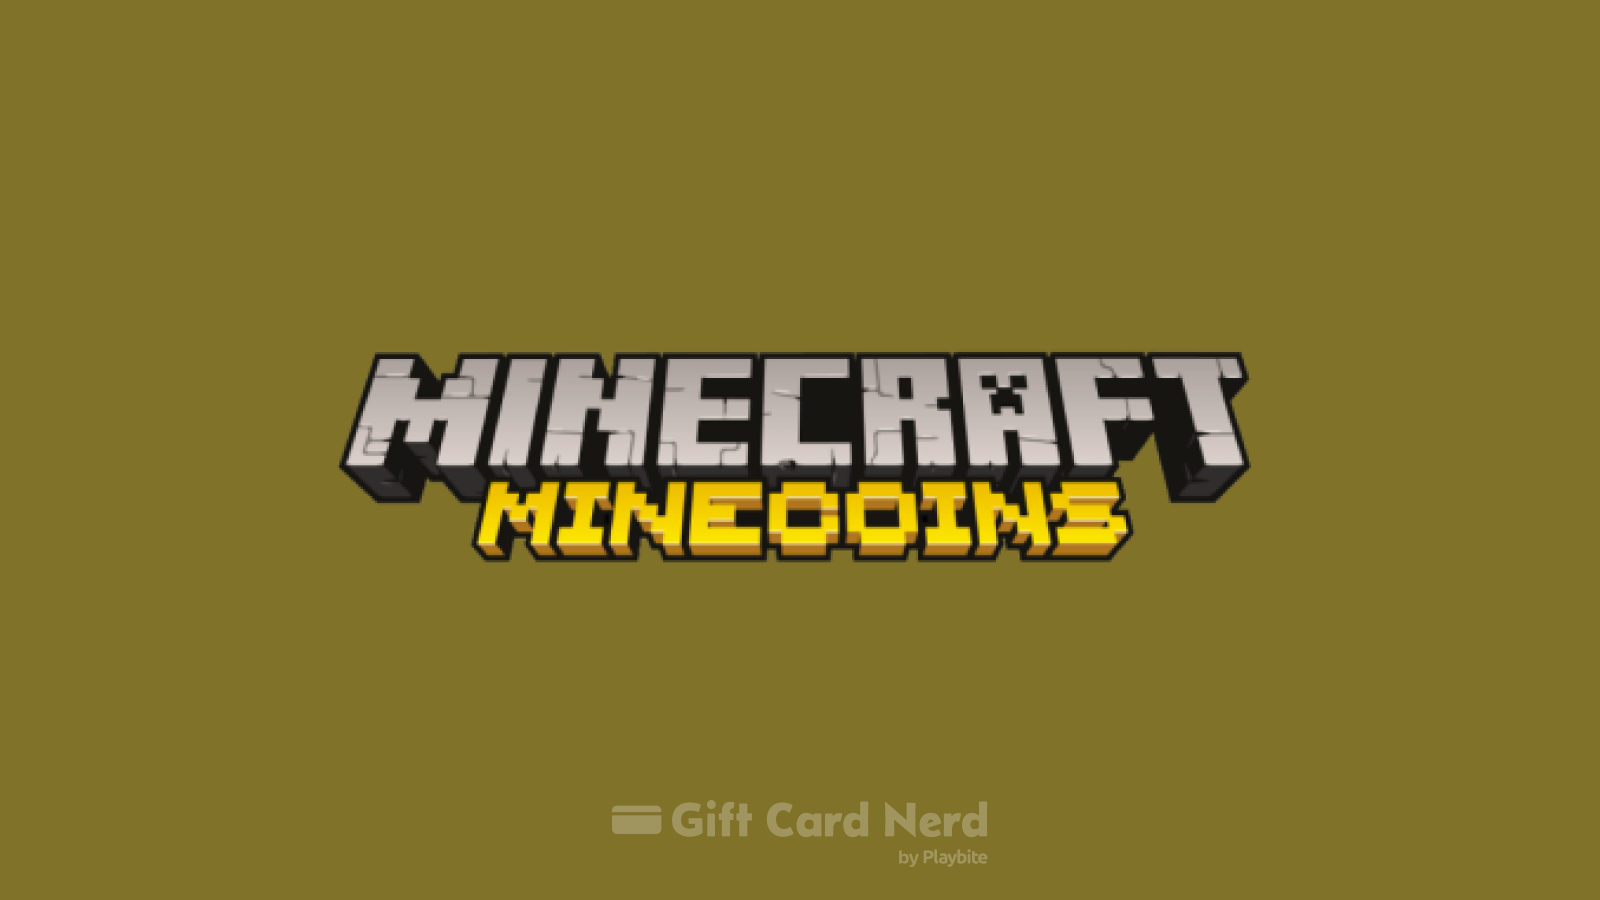 Can You Use a Minecraft Gift Card on Amazon?